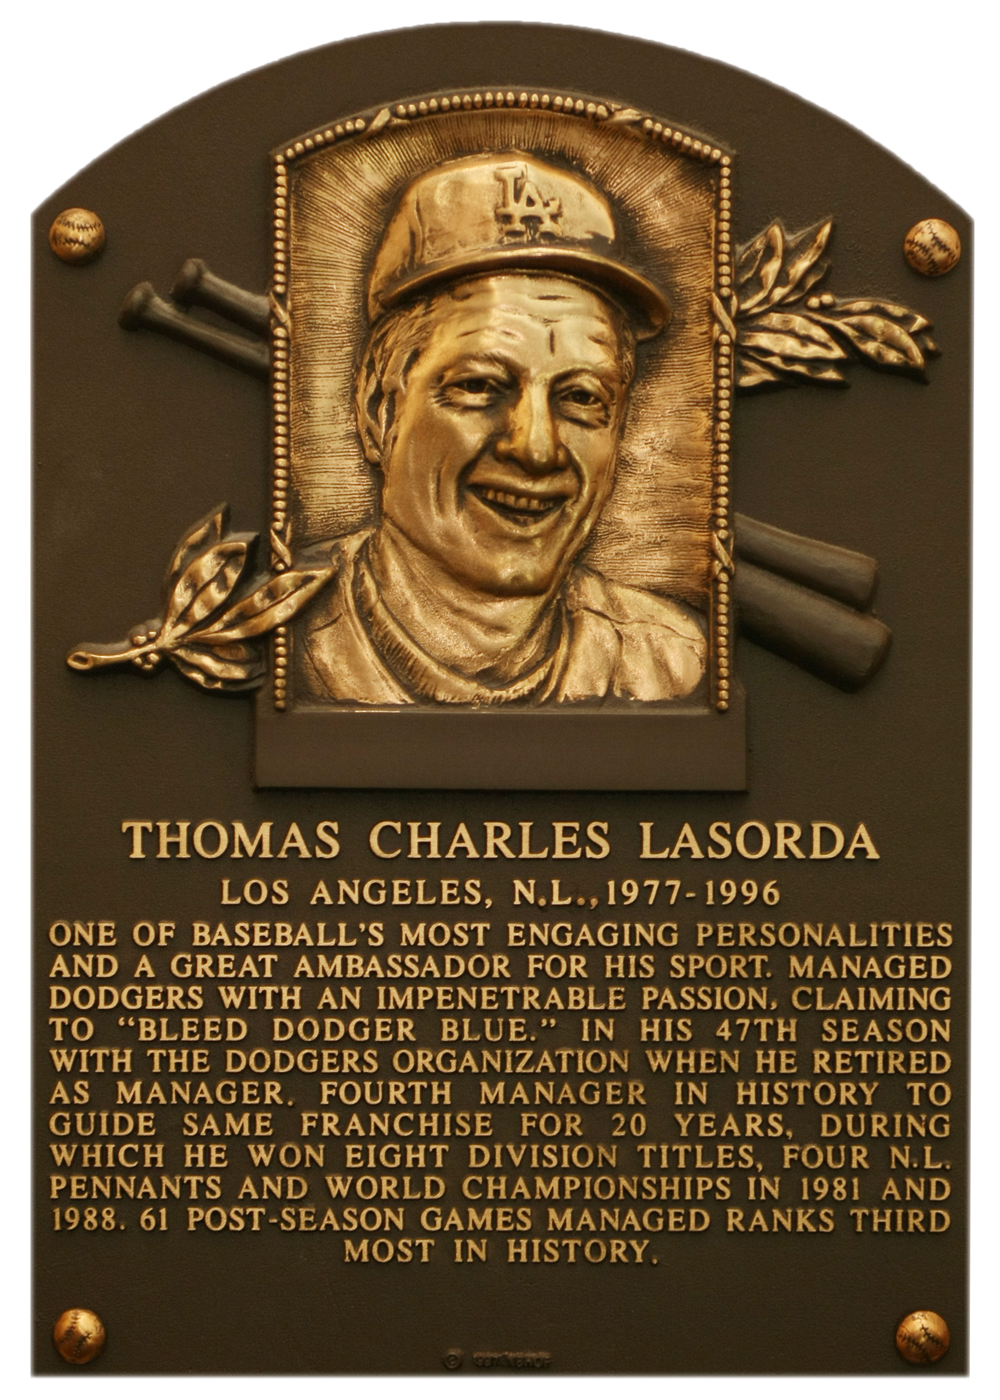 Tommy Lasorda Hall of Fame plaque